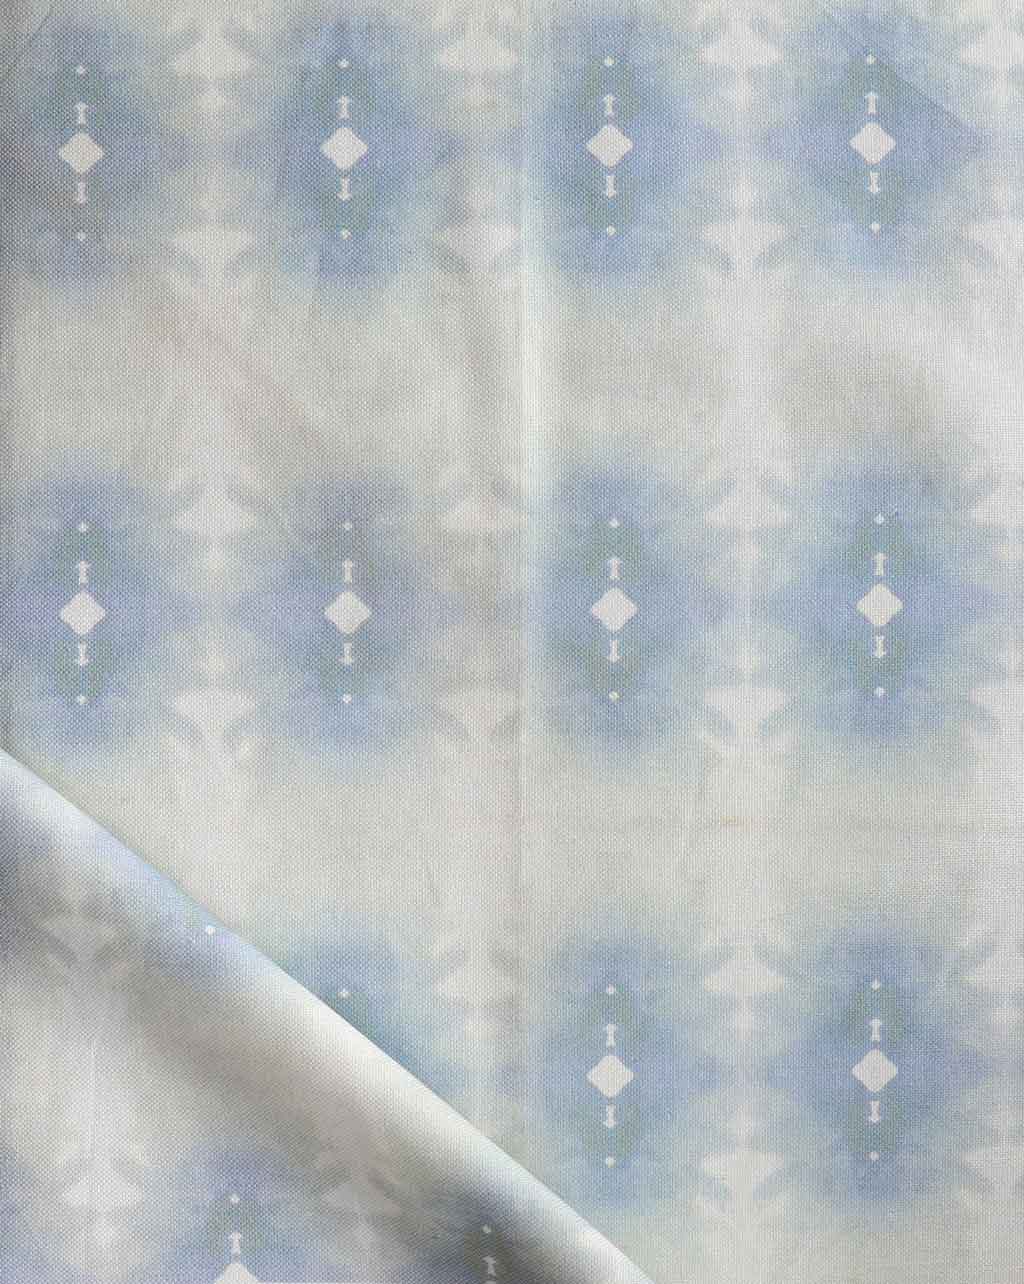 An Areca Palms Fabric Mist, a blue and white fabric with a geometric pattern, inspired by the oceanic art of the Kwoma people from Papua New Guinea